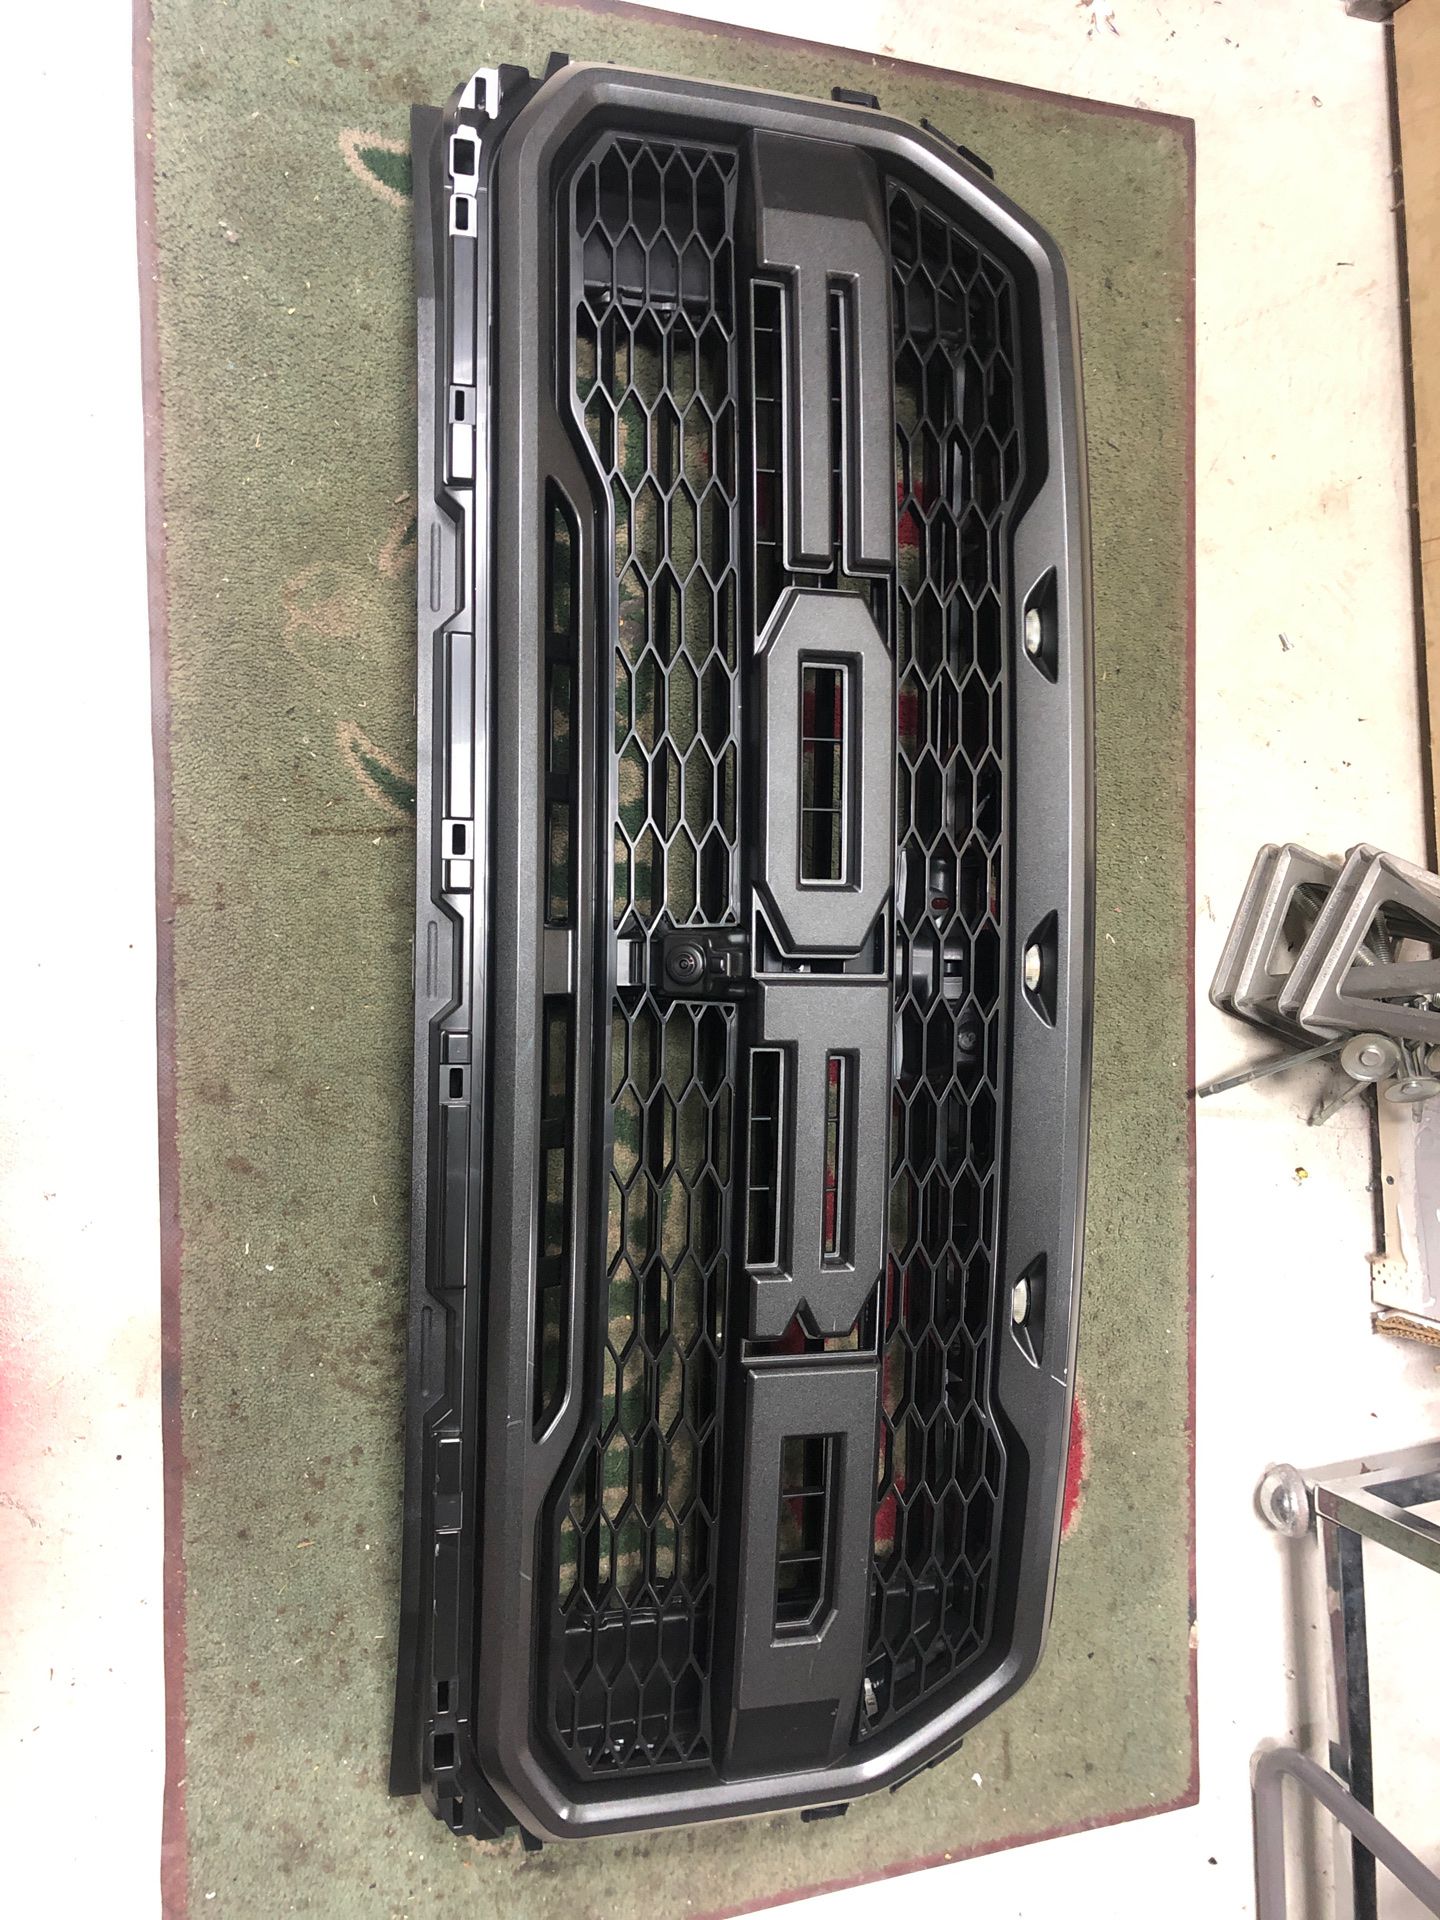 2018 Ford F-150 grill with sensor and lights